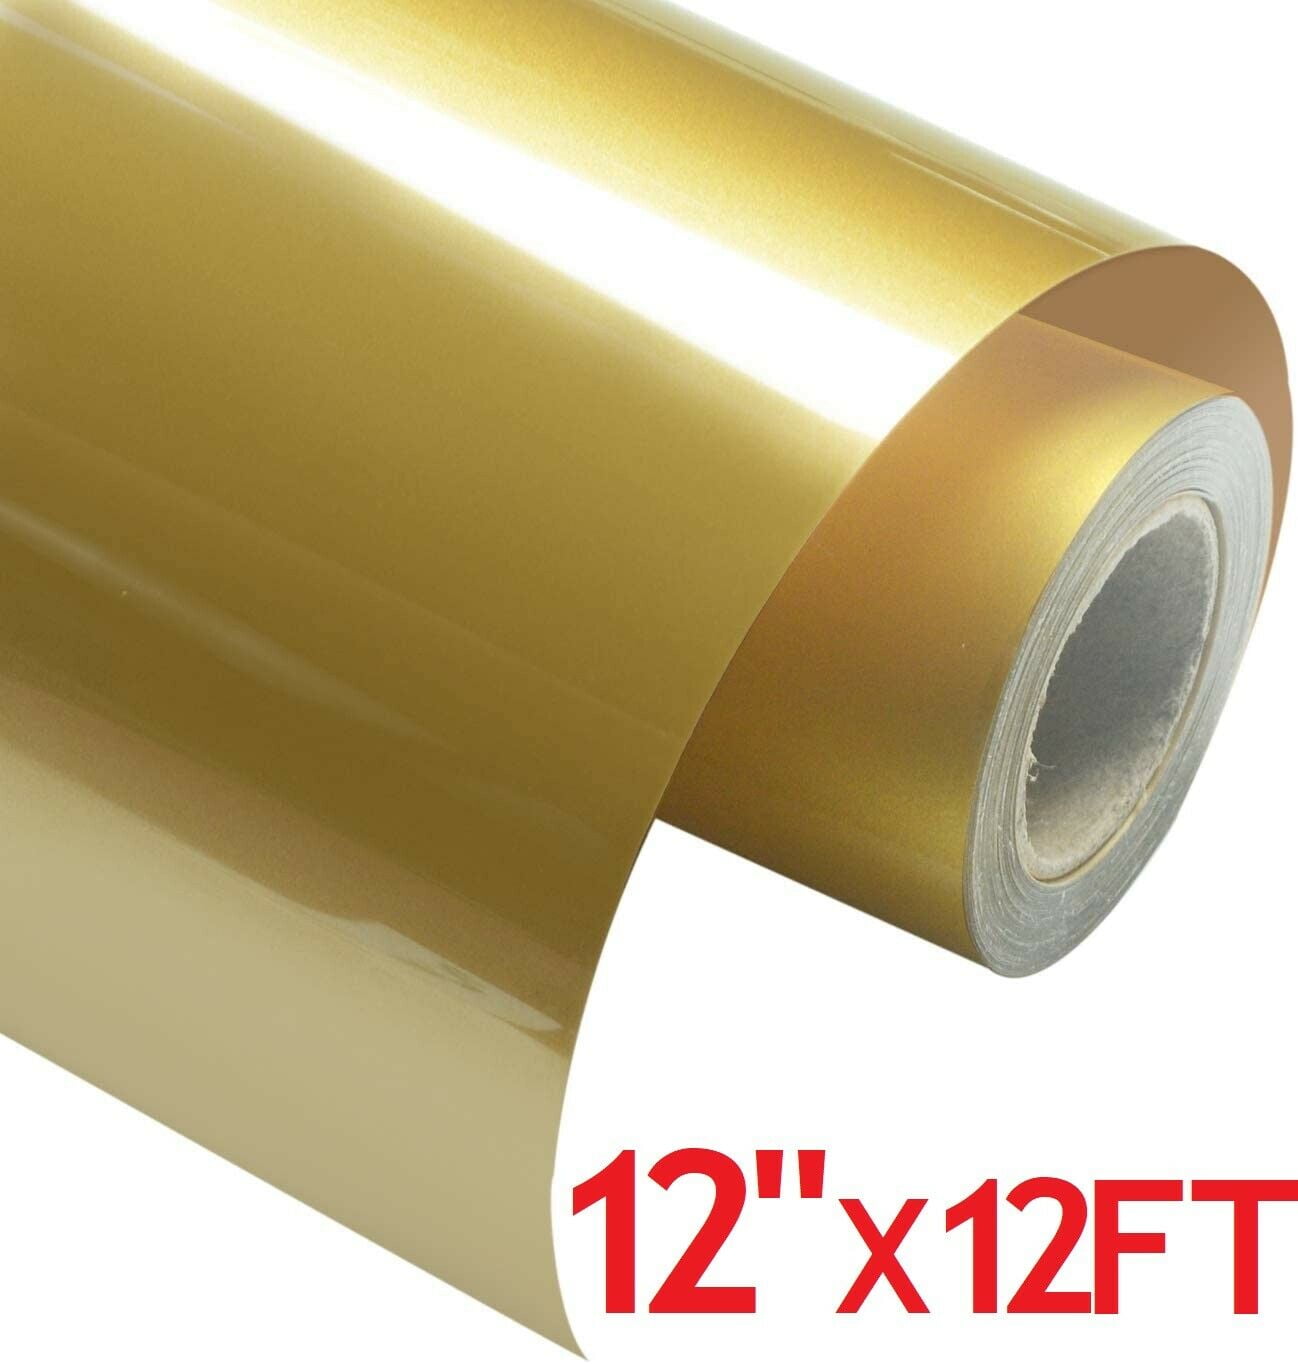 10mm x33m (108ft) High Temperature Heat Resistant Tape Heat Transfer Tape  for Heat Sublimation Press No Residue and Heat Transfer Vinyl 